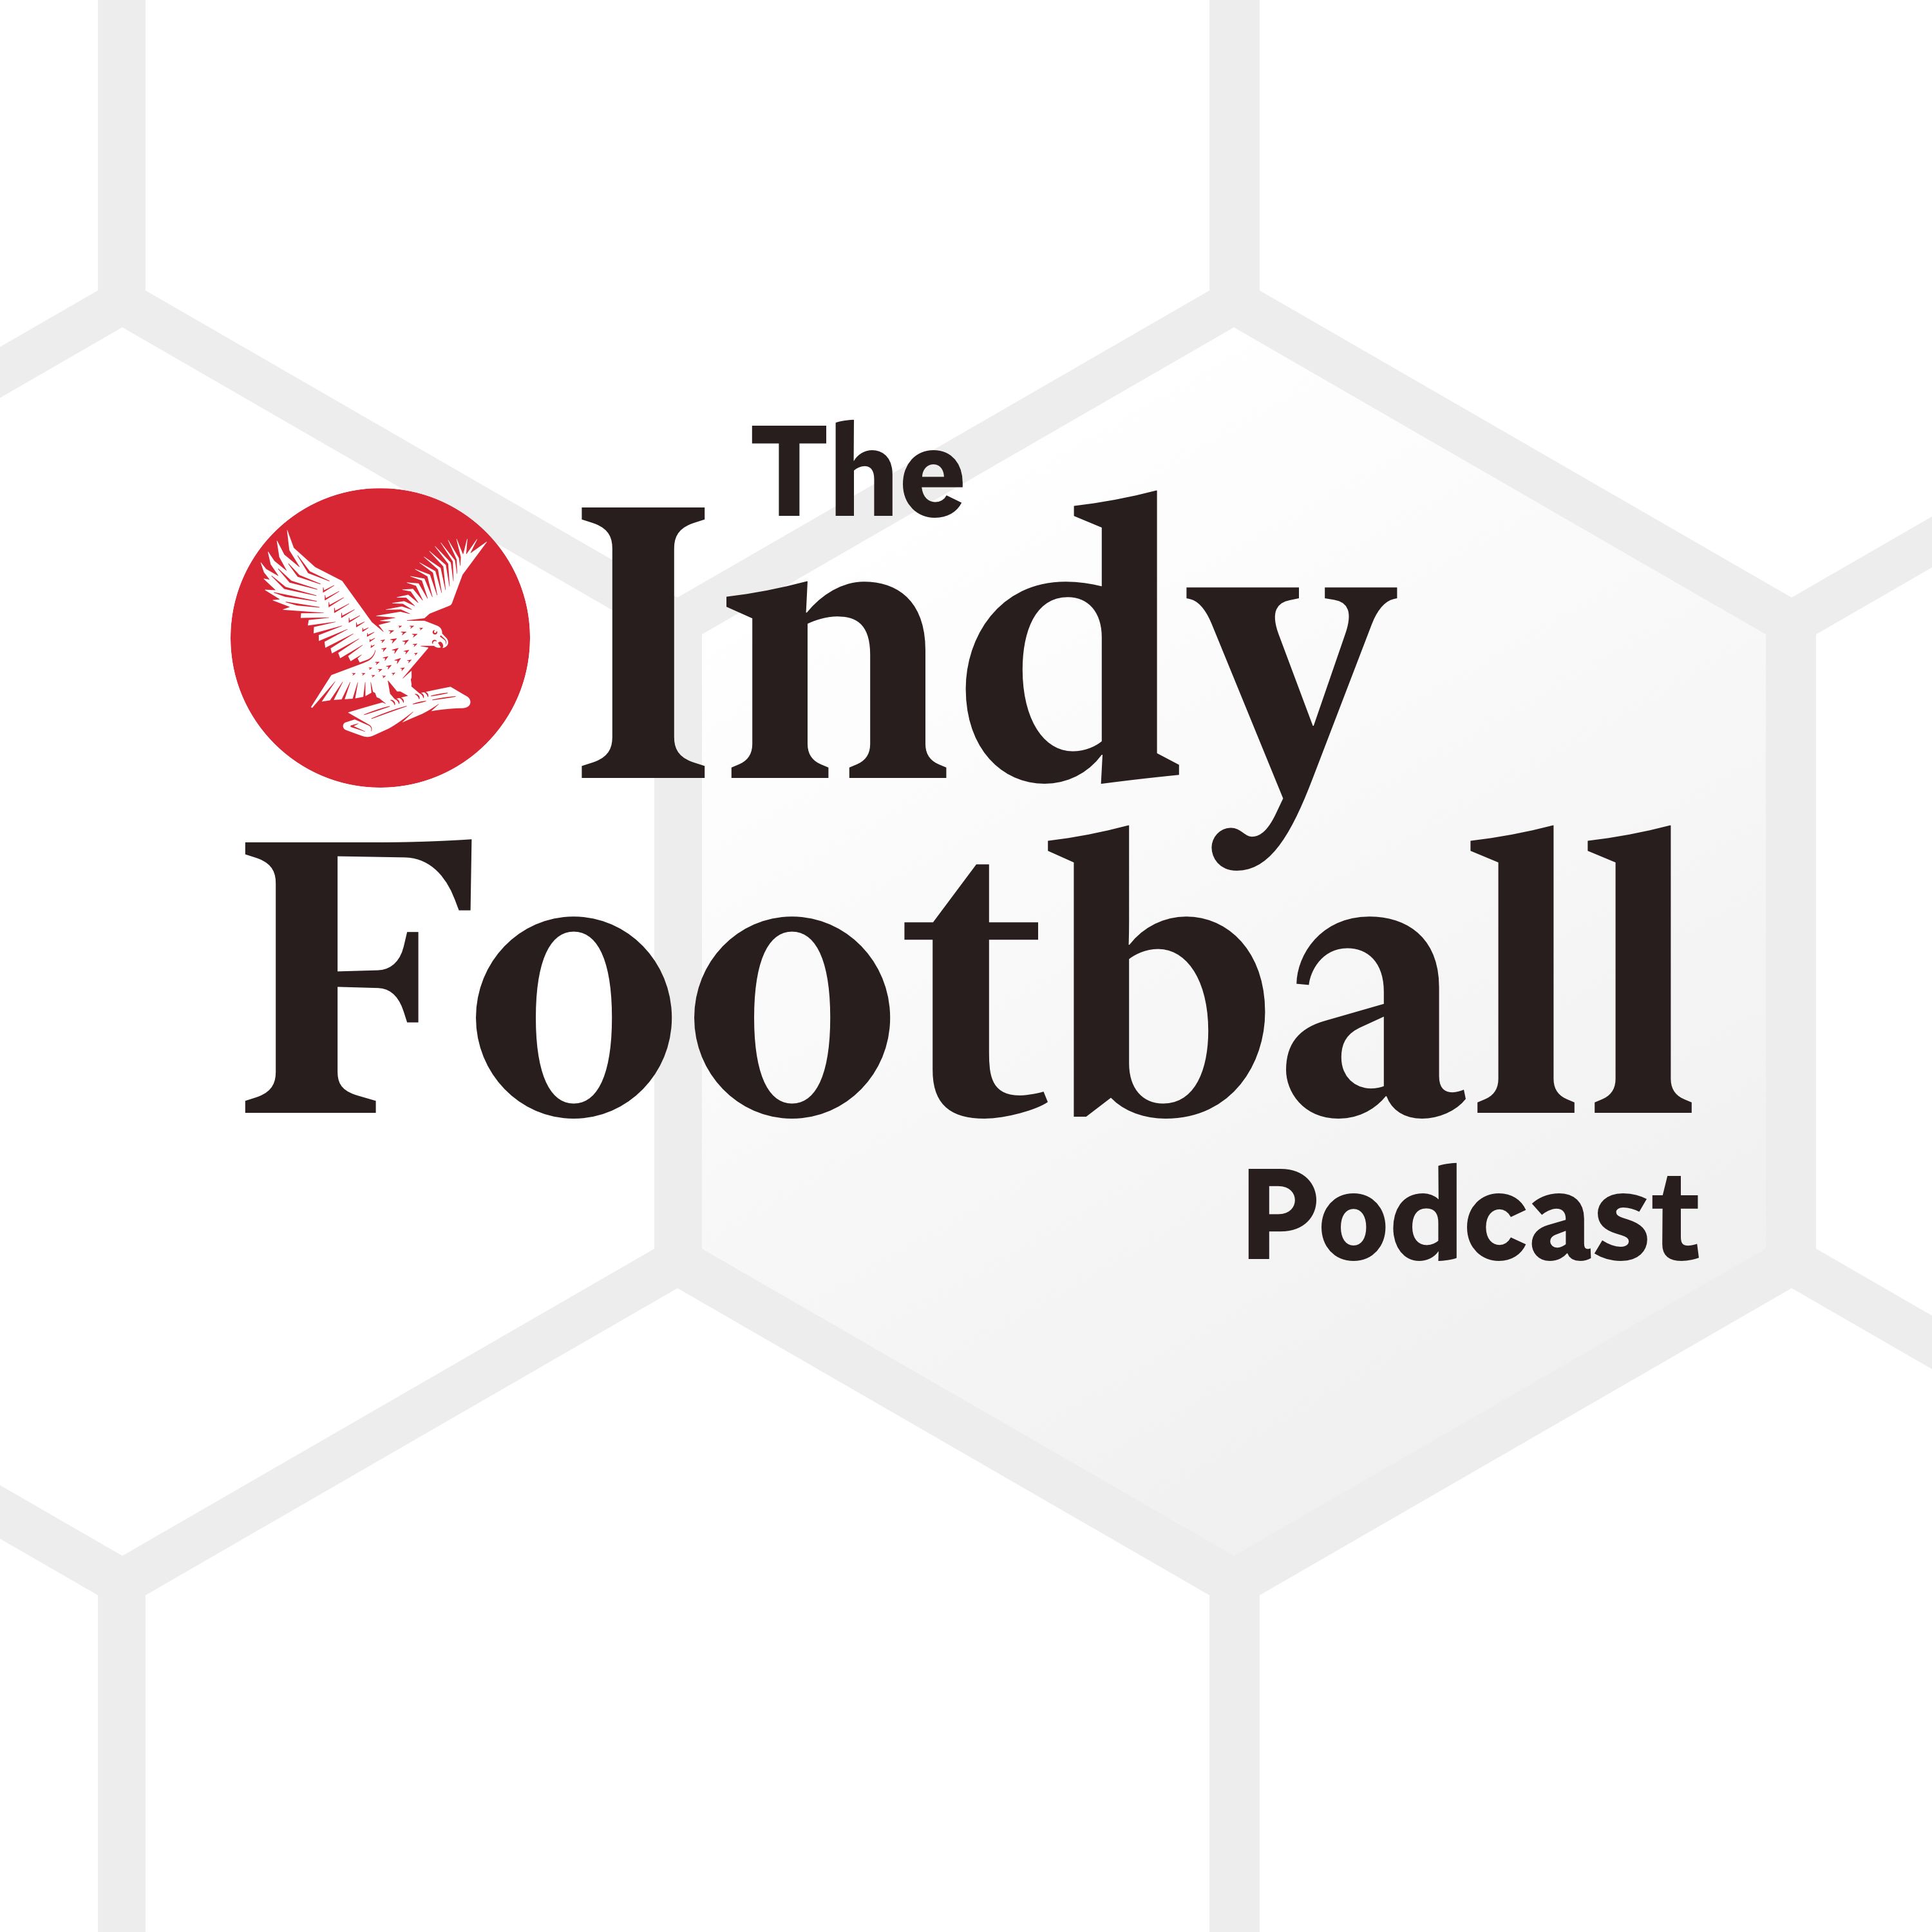 Introducing the Indy Rugby Podcast